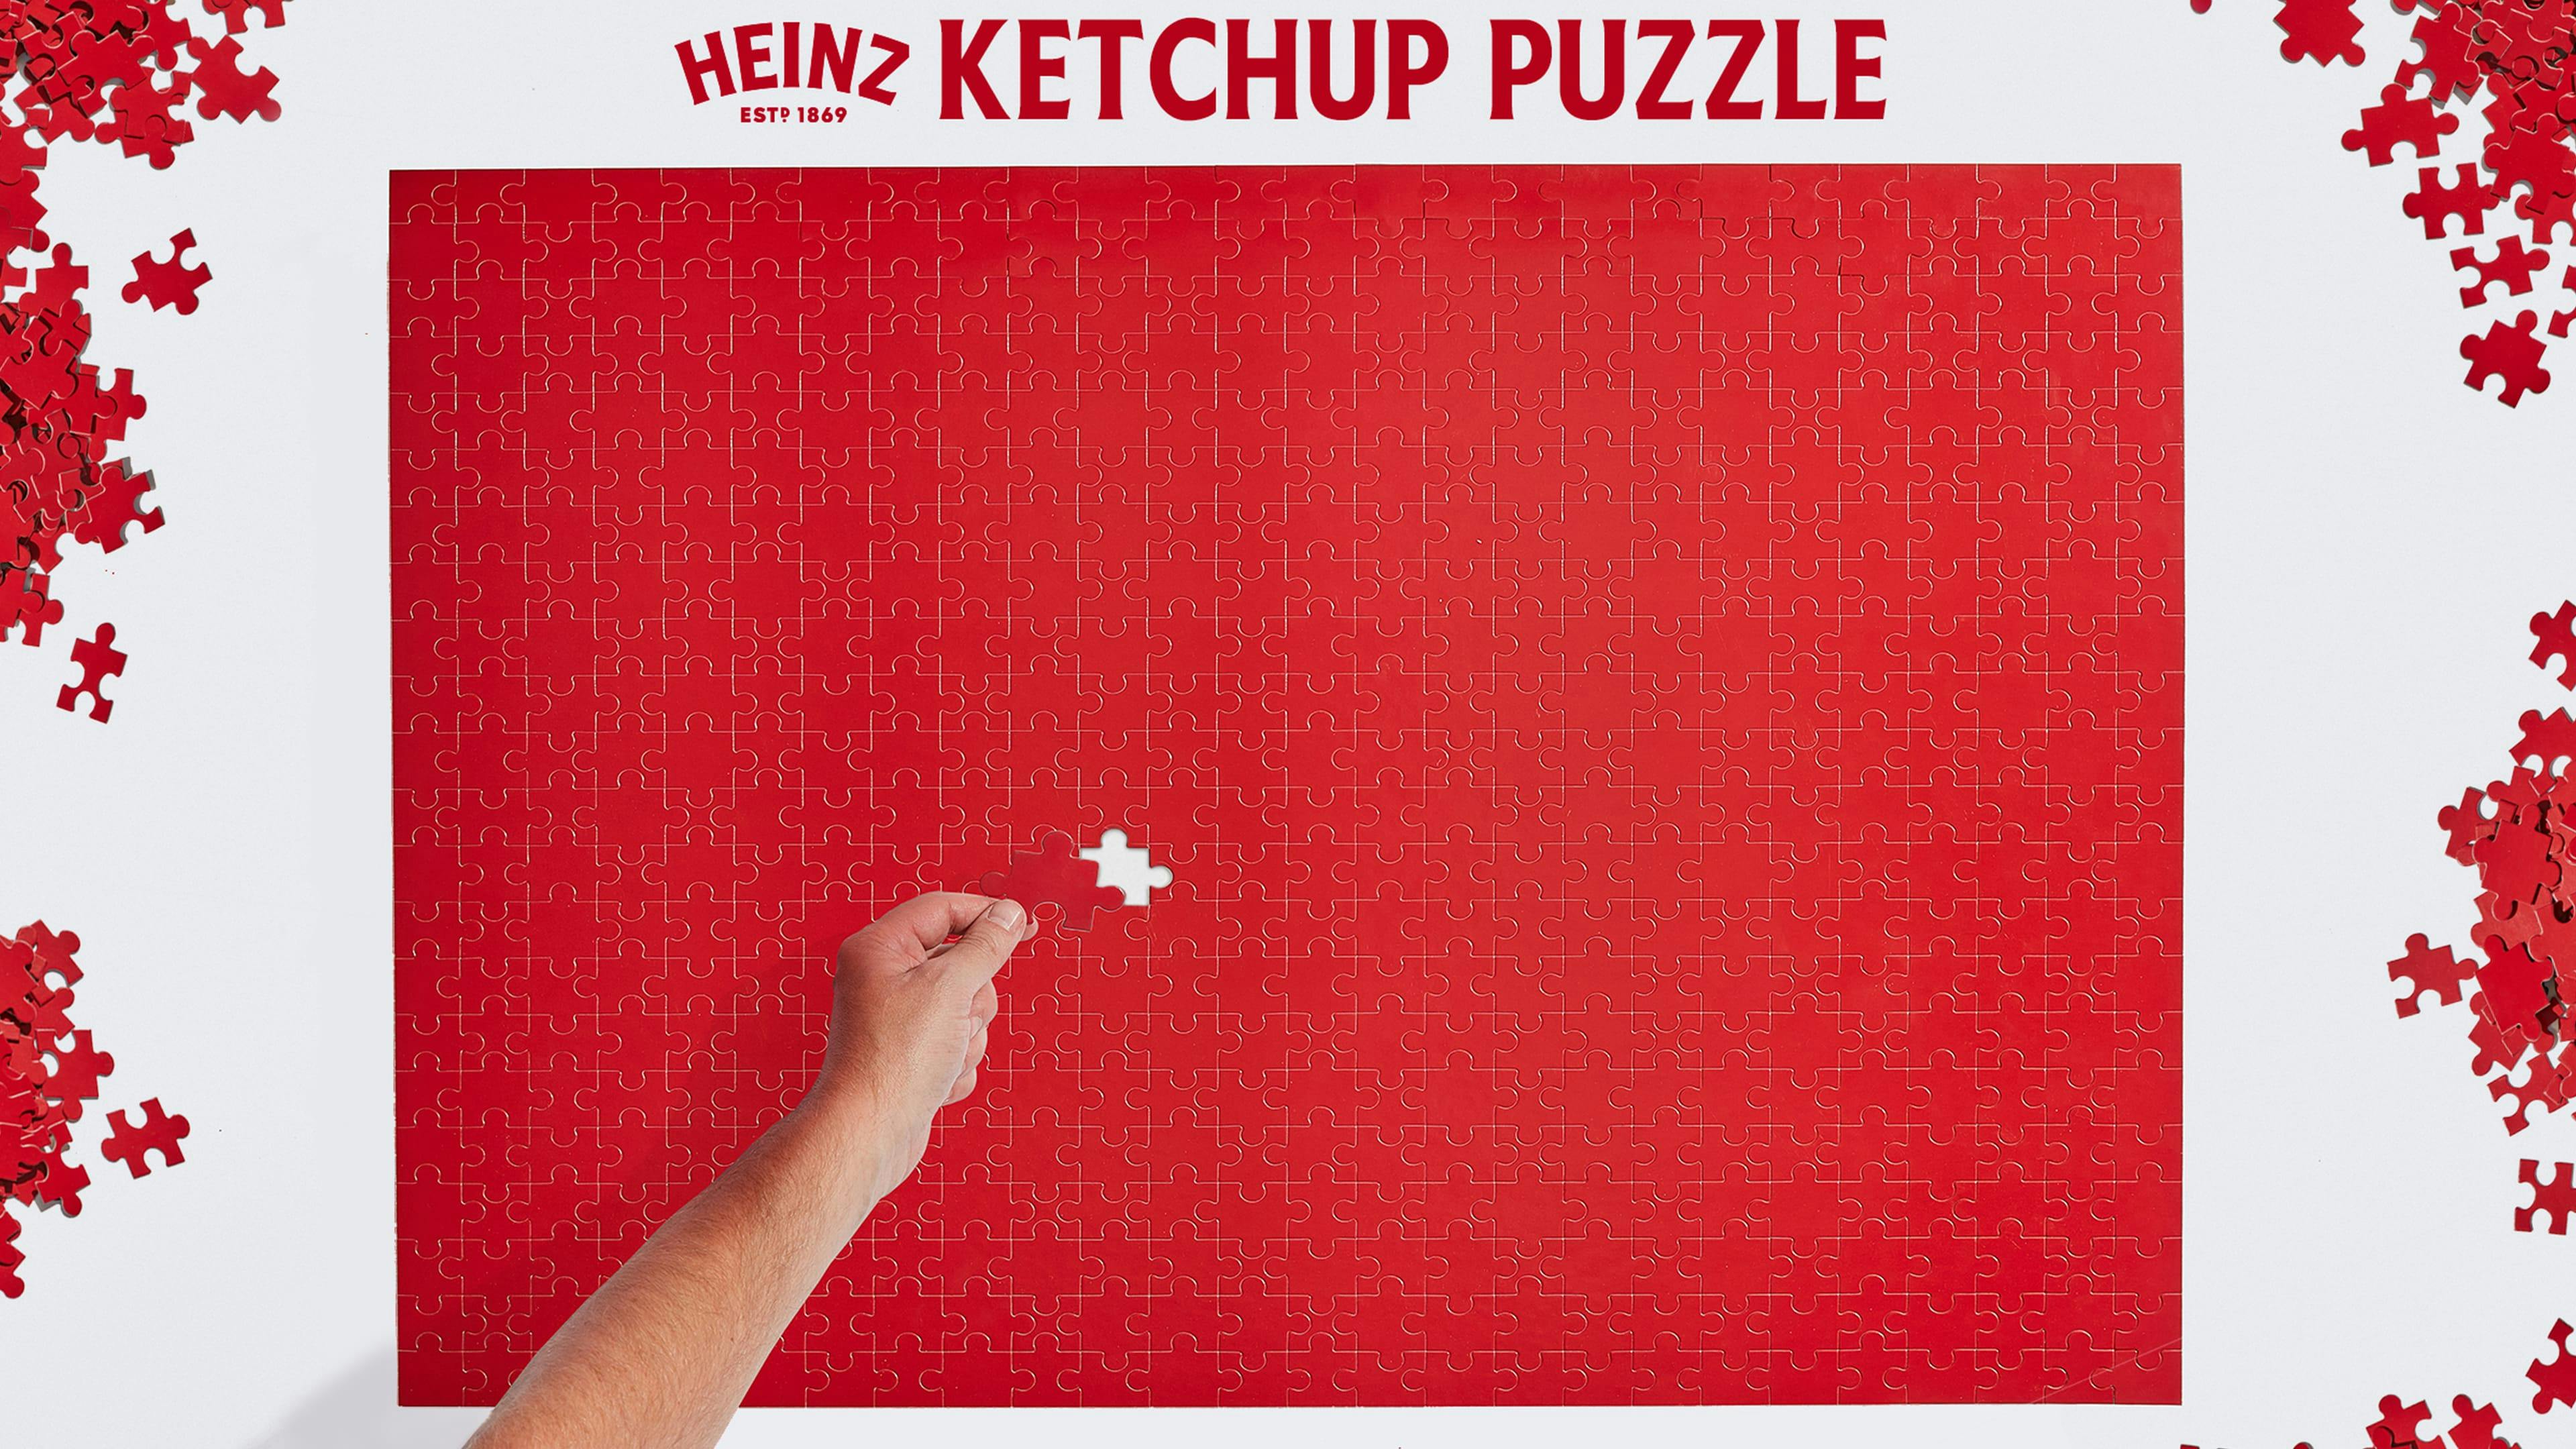 Heinz ketchup puzzle with one piece left to add.